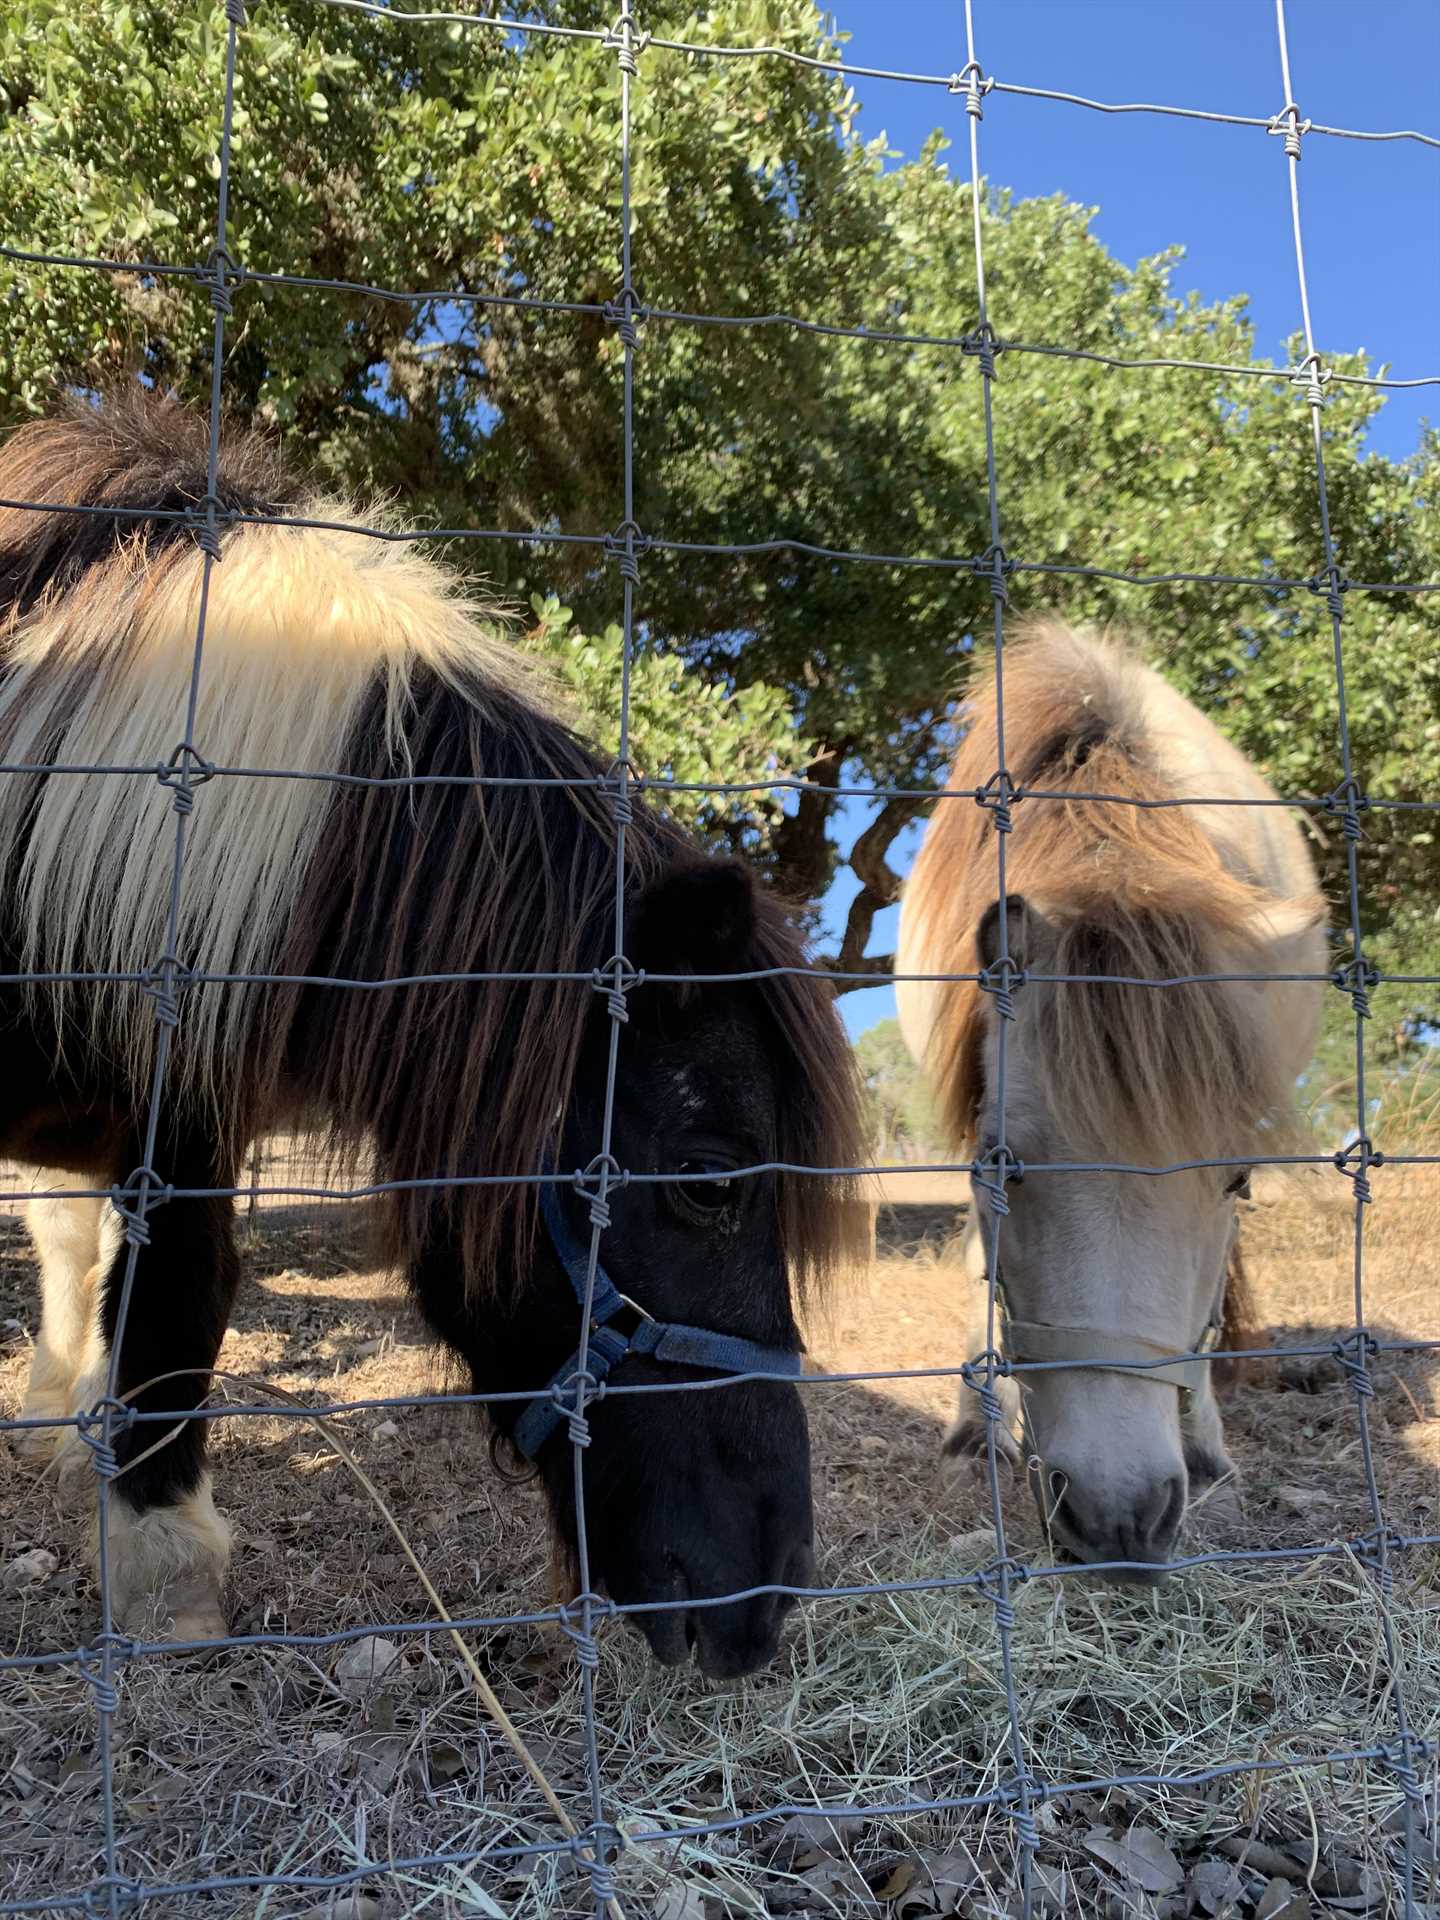                                                 Buttercup and Jelly Bean are two of the equine mascots here at Tabasco Ranch.